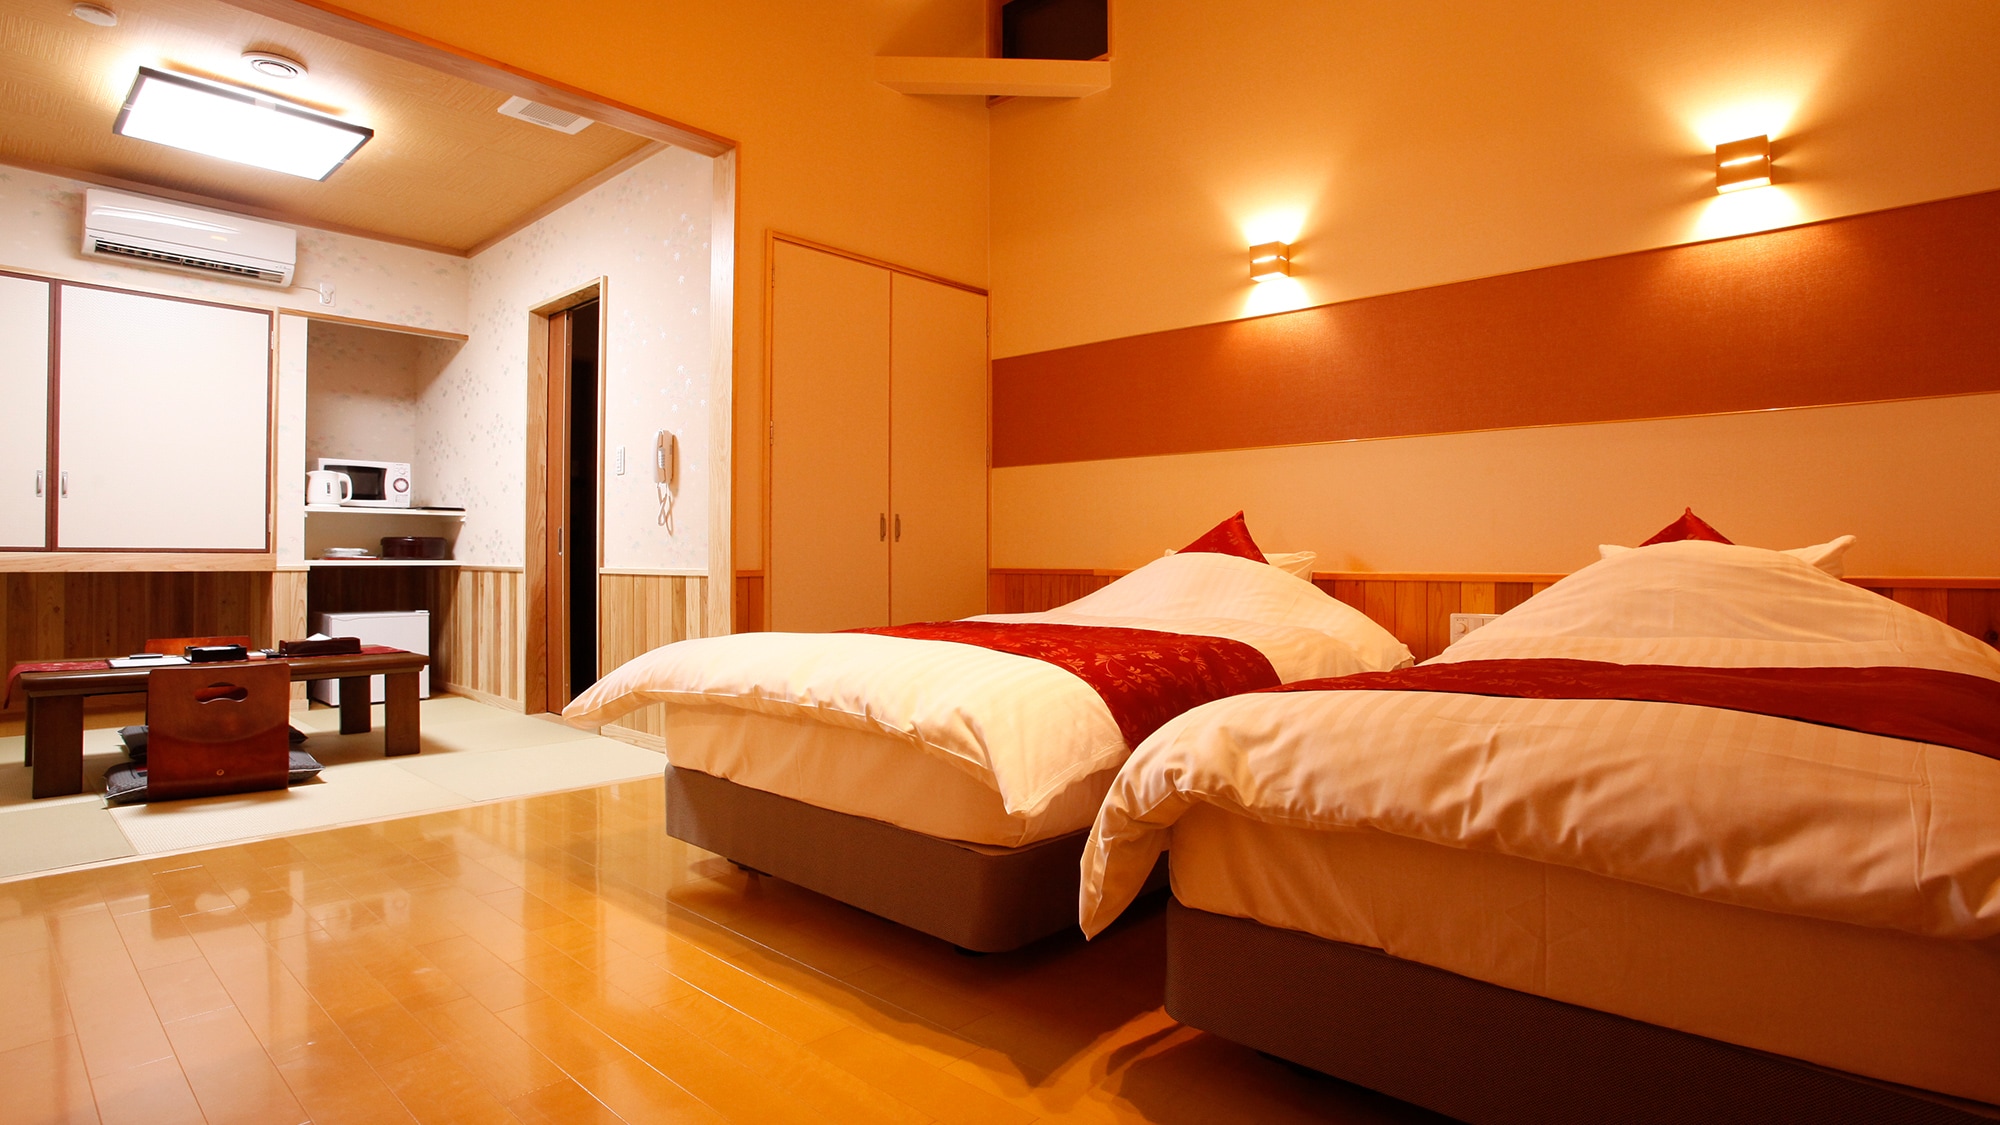  [One-story hanare B] Maple size 43㎡ Japanese-style room 4.5 tatami mats + Western-style room (twin)